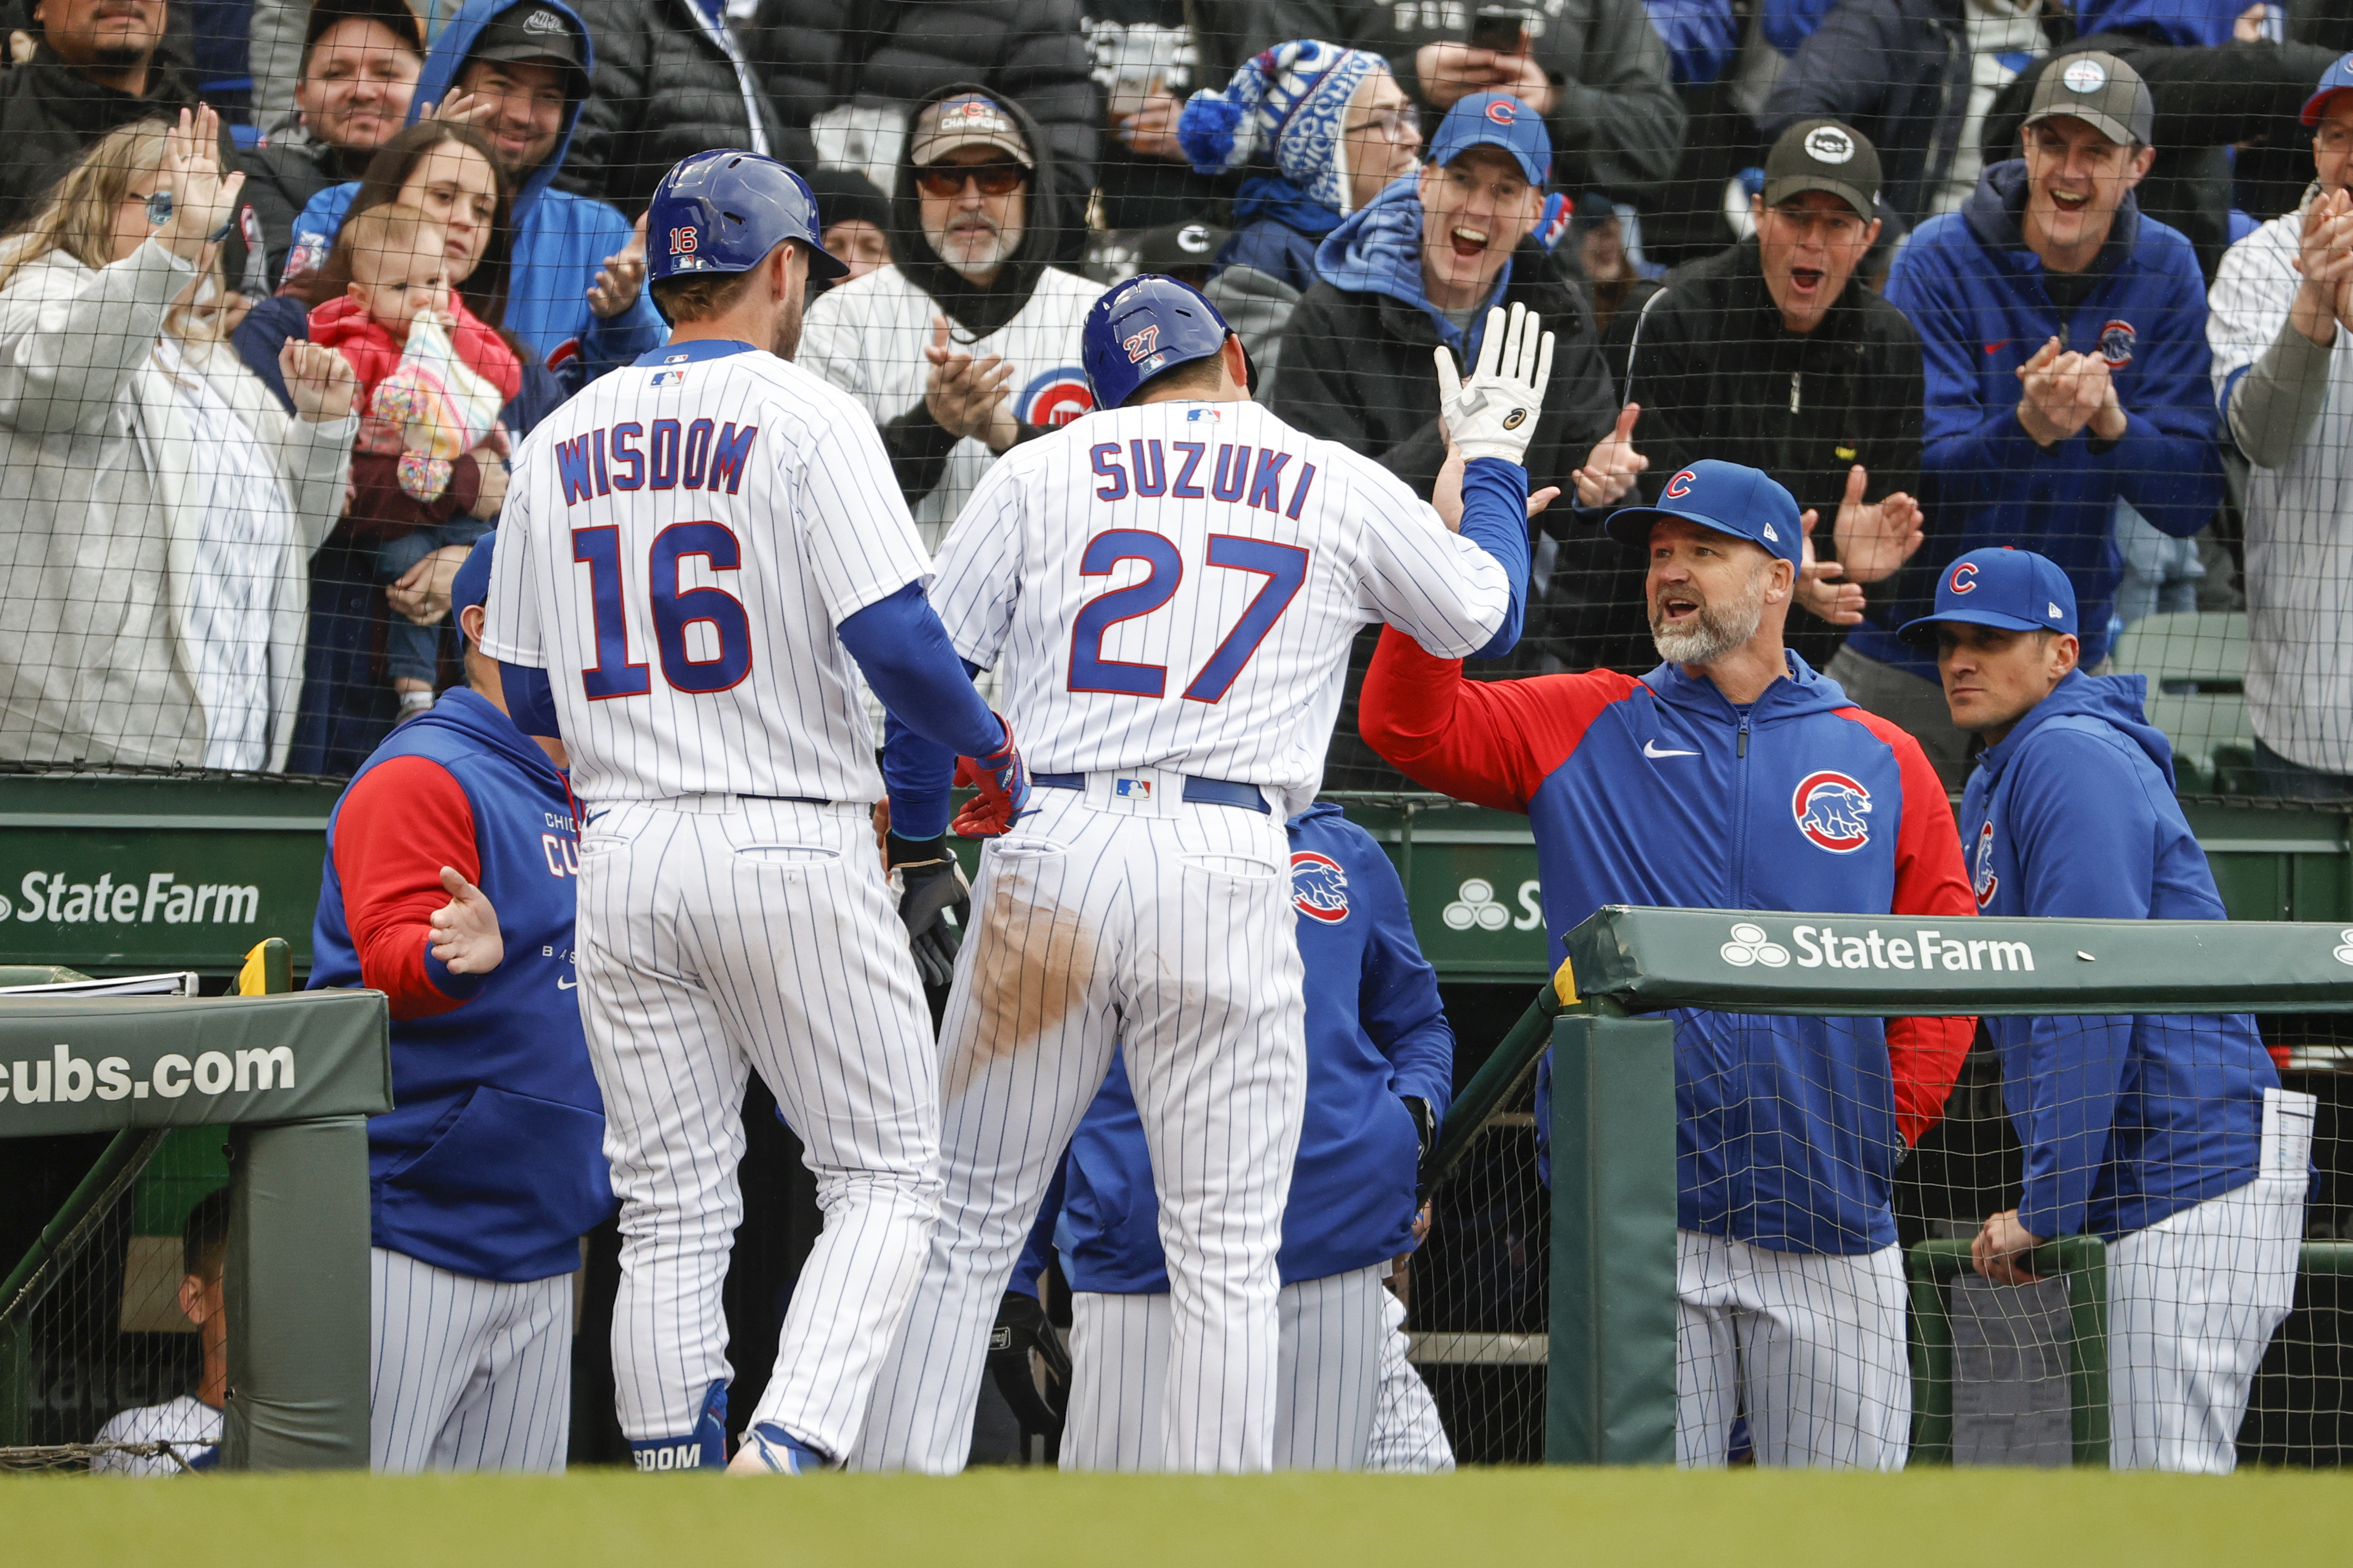 Ian Happ hits go-ahead single in 10th, Cubs move closer to NL Central lead  with 5-4 win over Pirates - Newsday